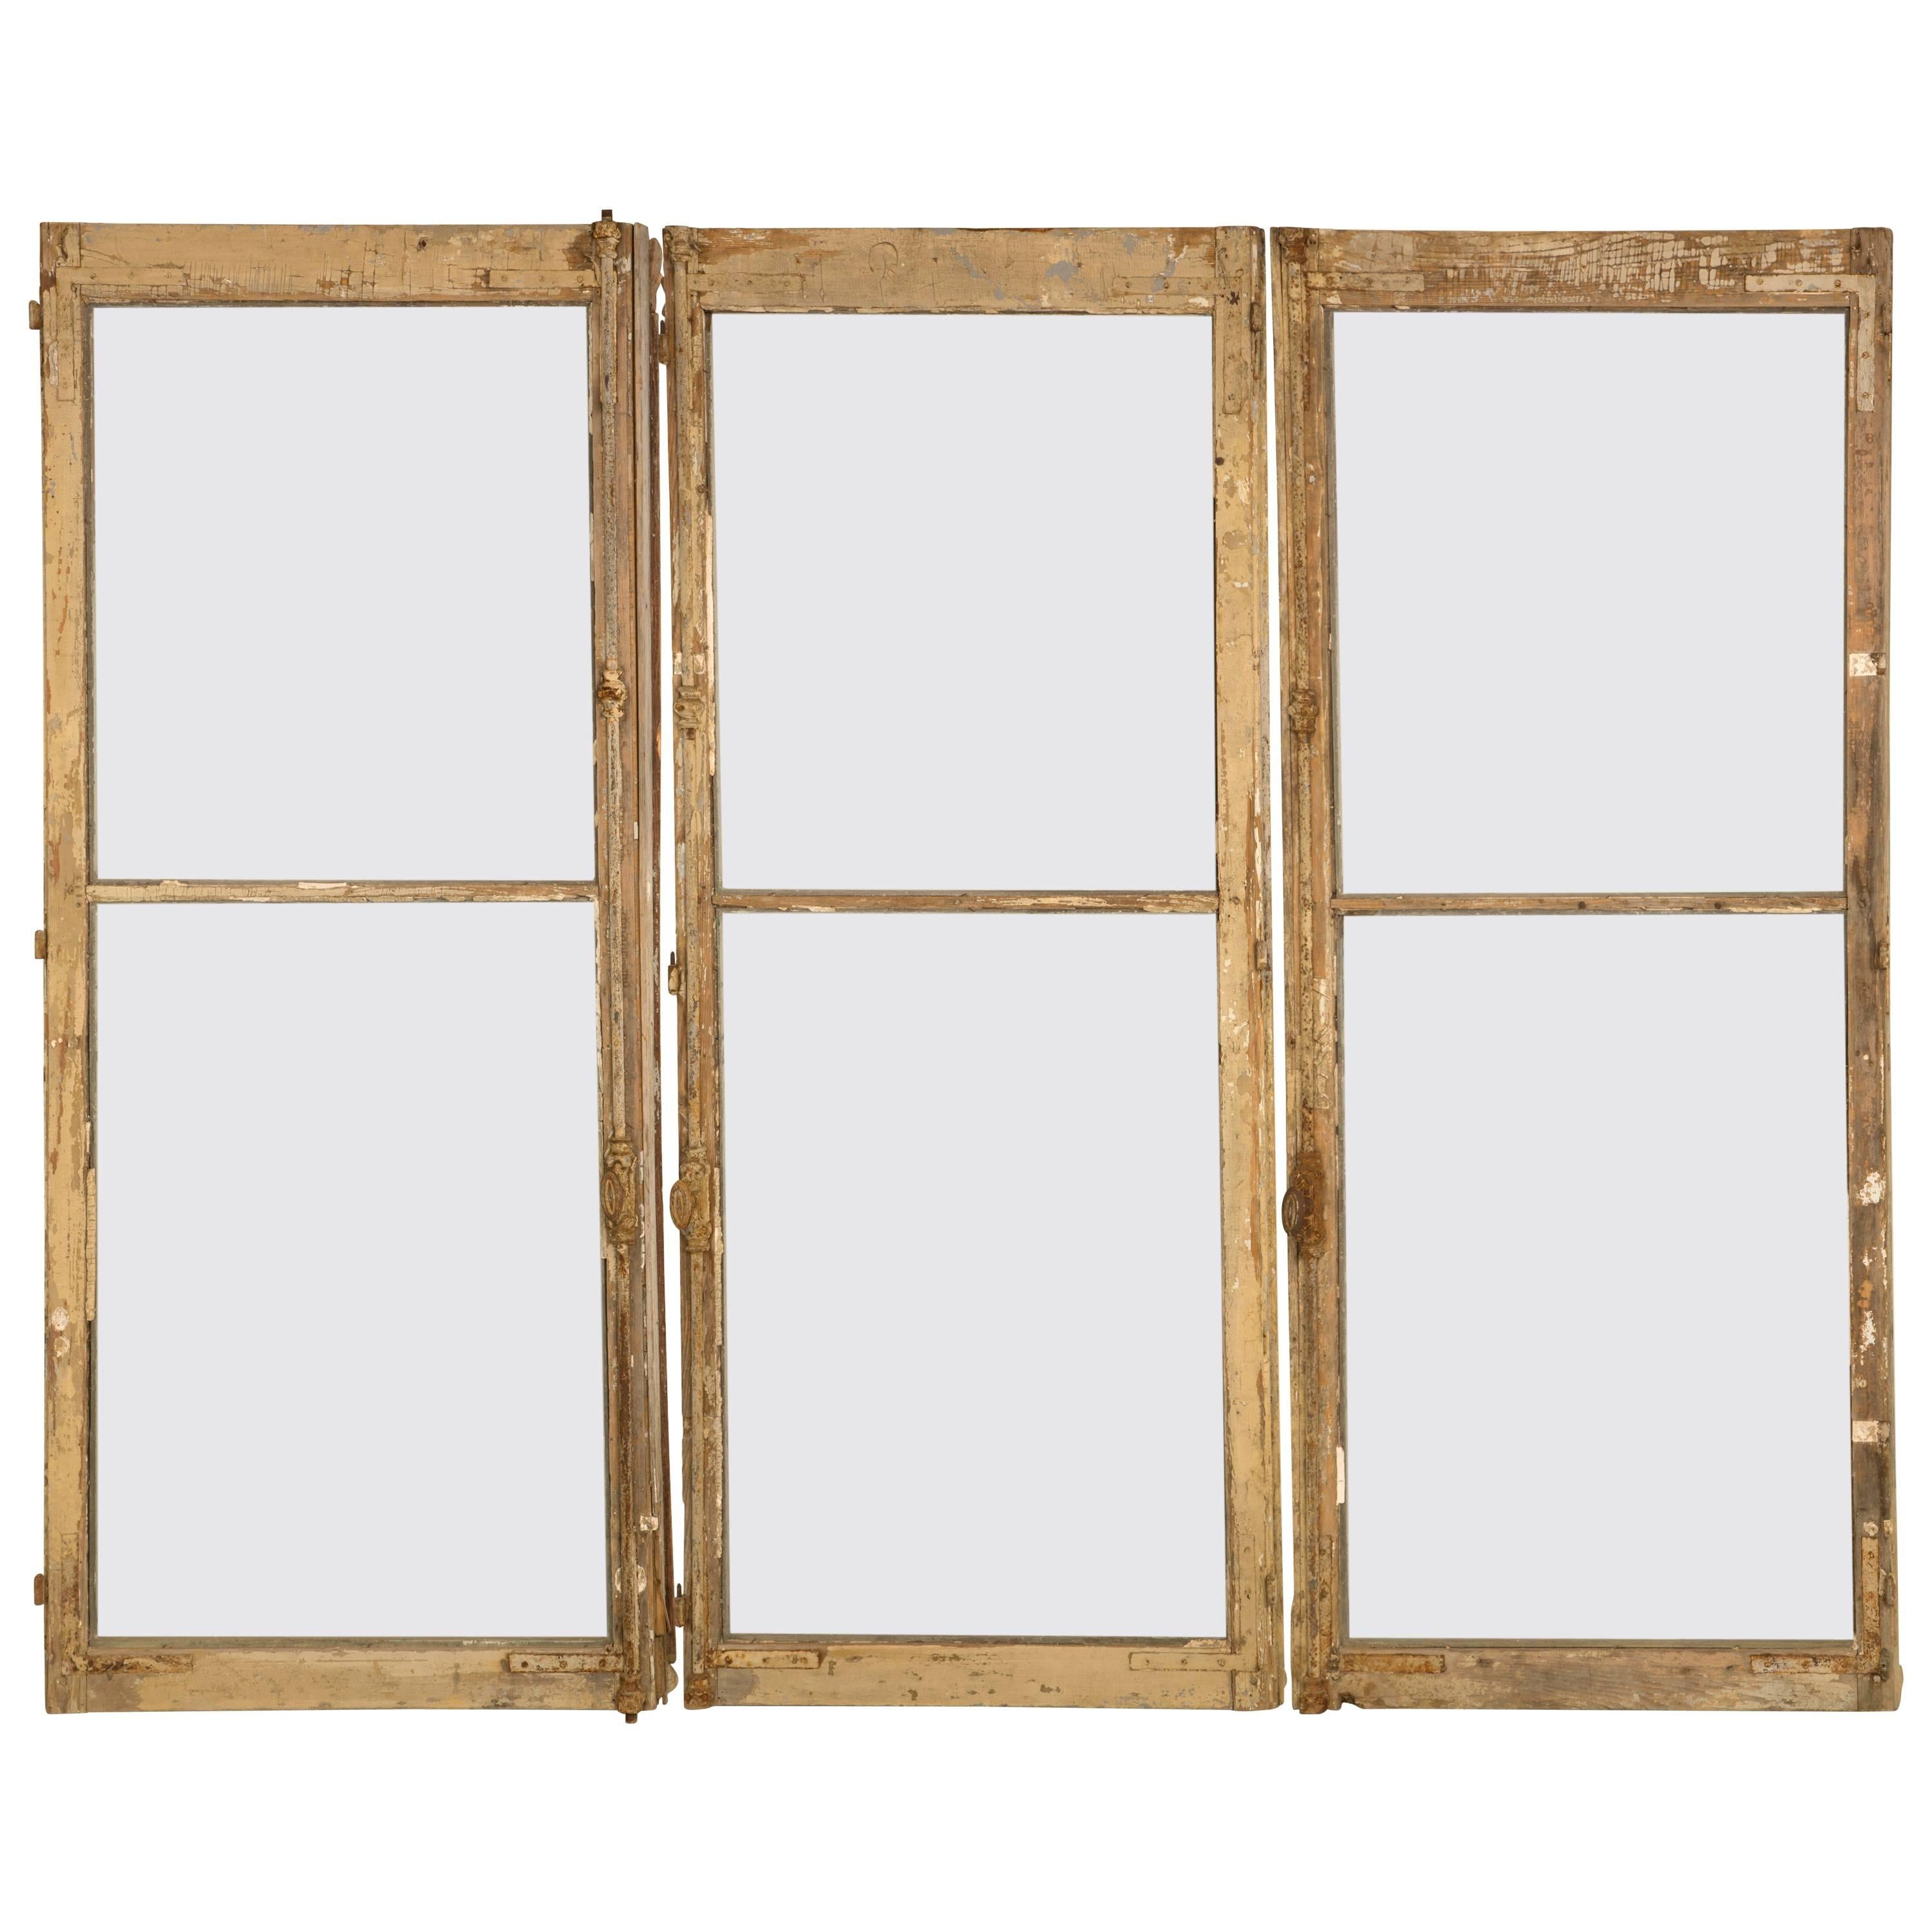 Antique French Windows in Their Original Paint and Hardware, Unrestored For Sale